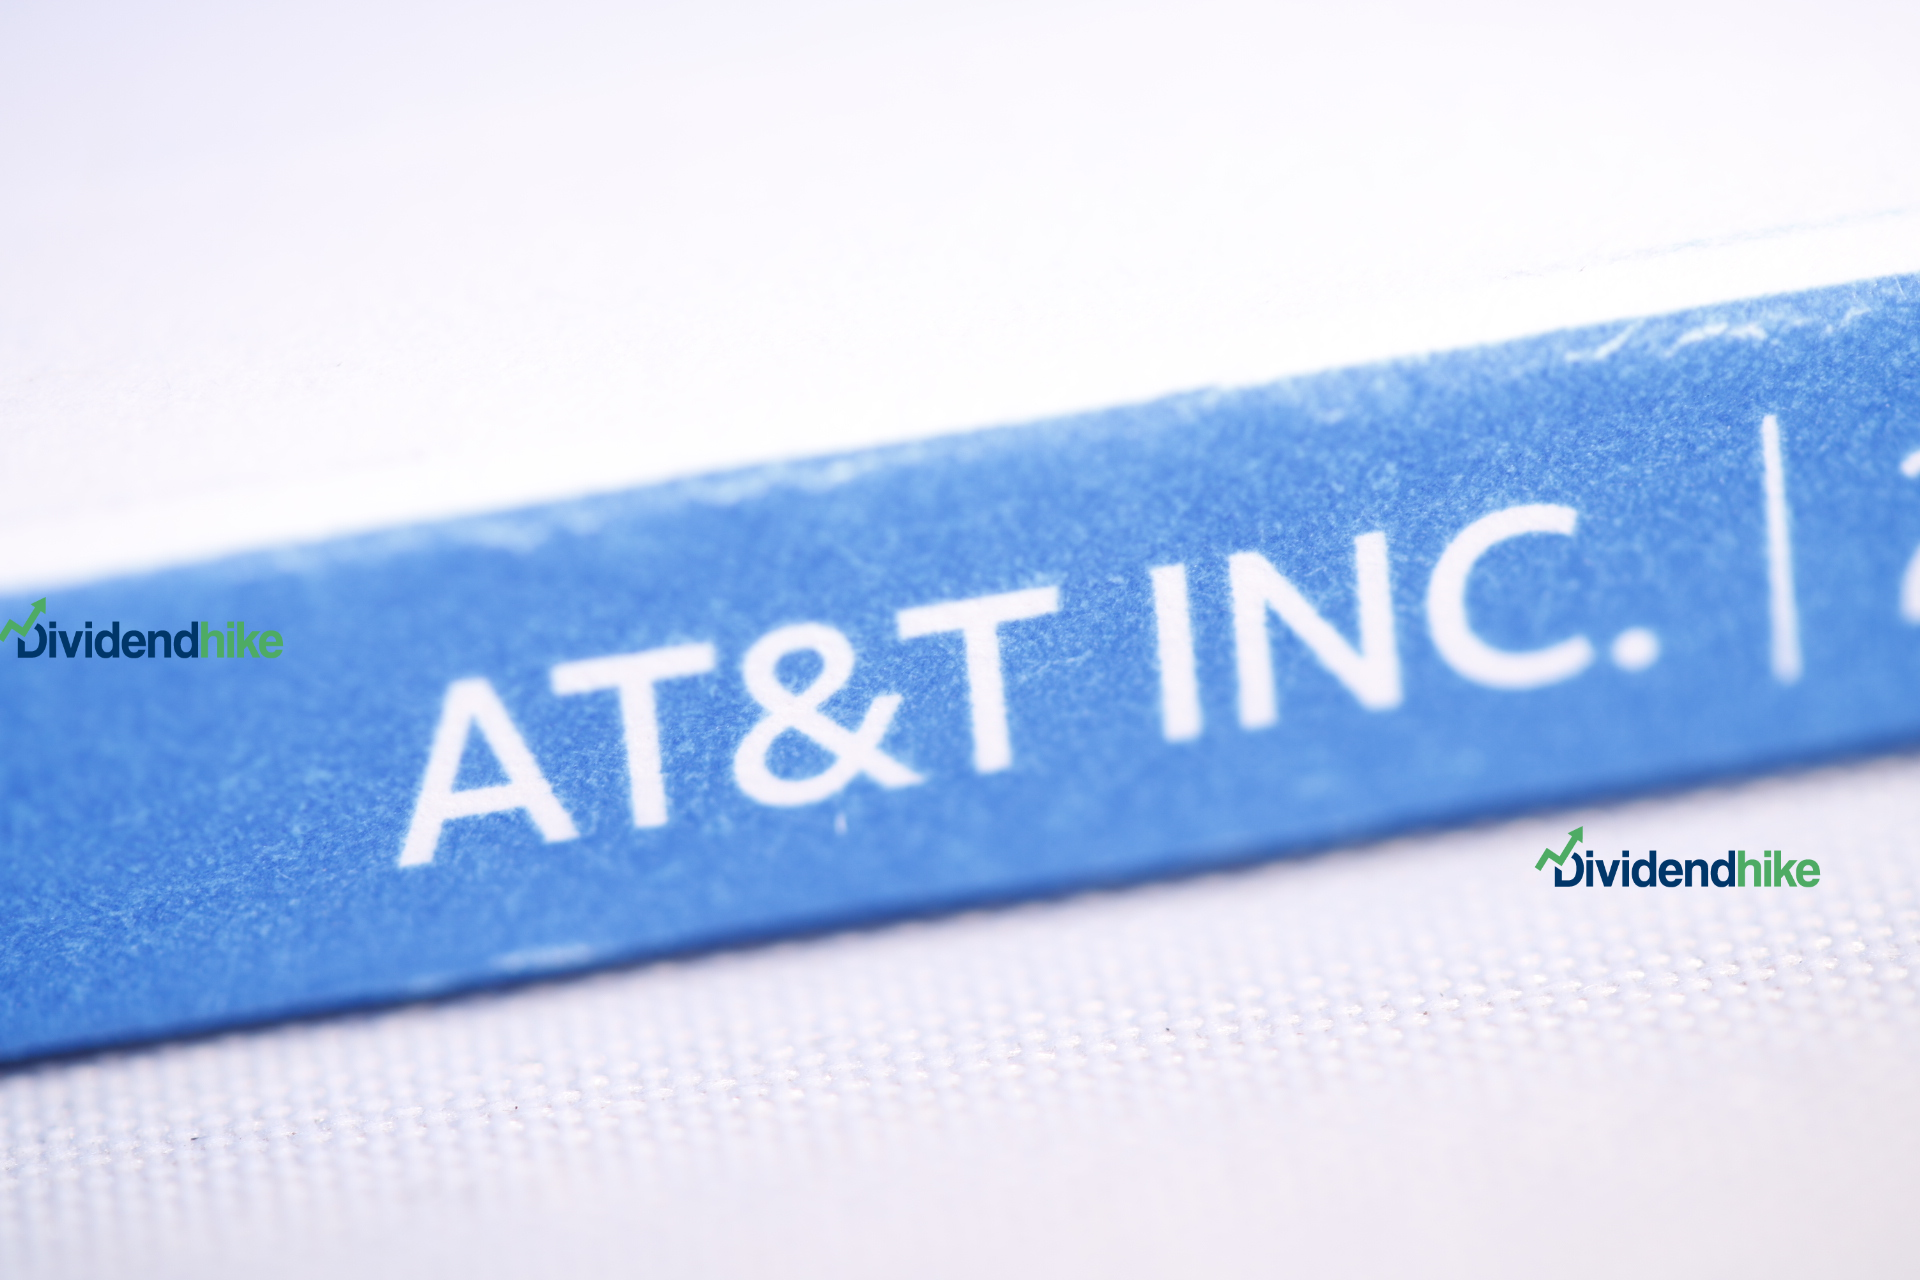 AT&T has paid a dividend every year since at least 1984 © dividendhike.com